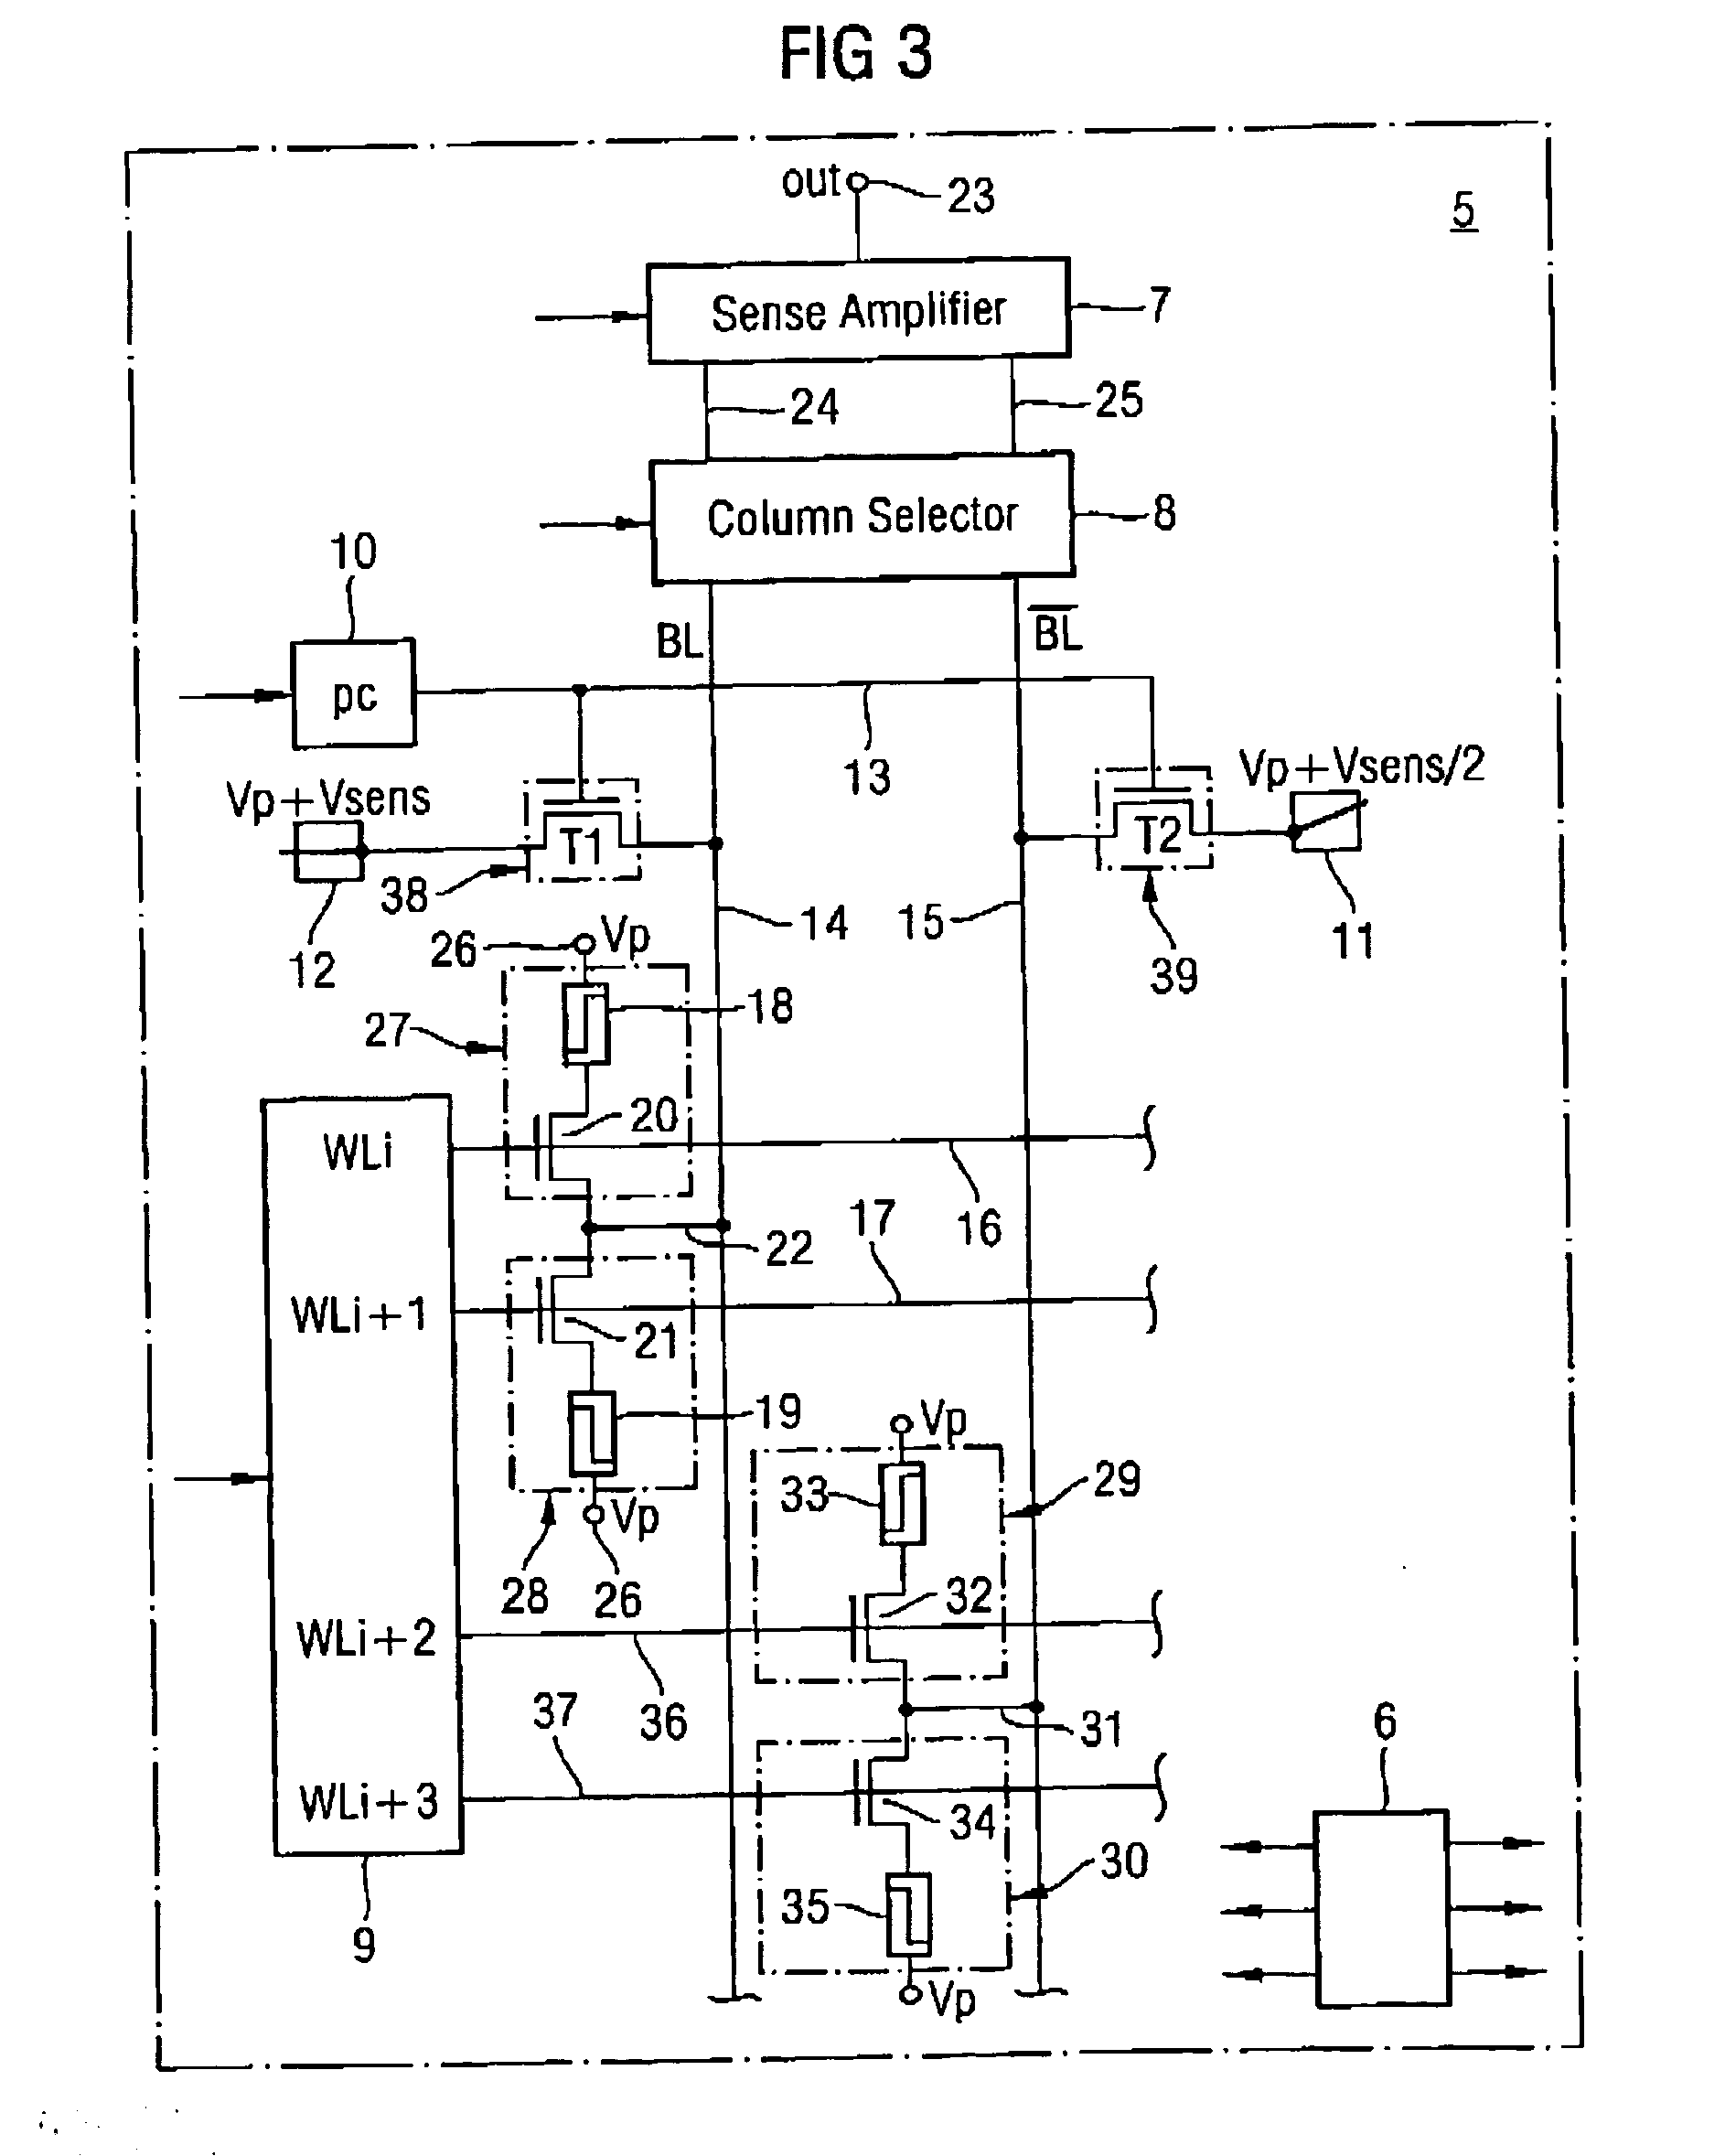 Memory device and method for reading data